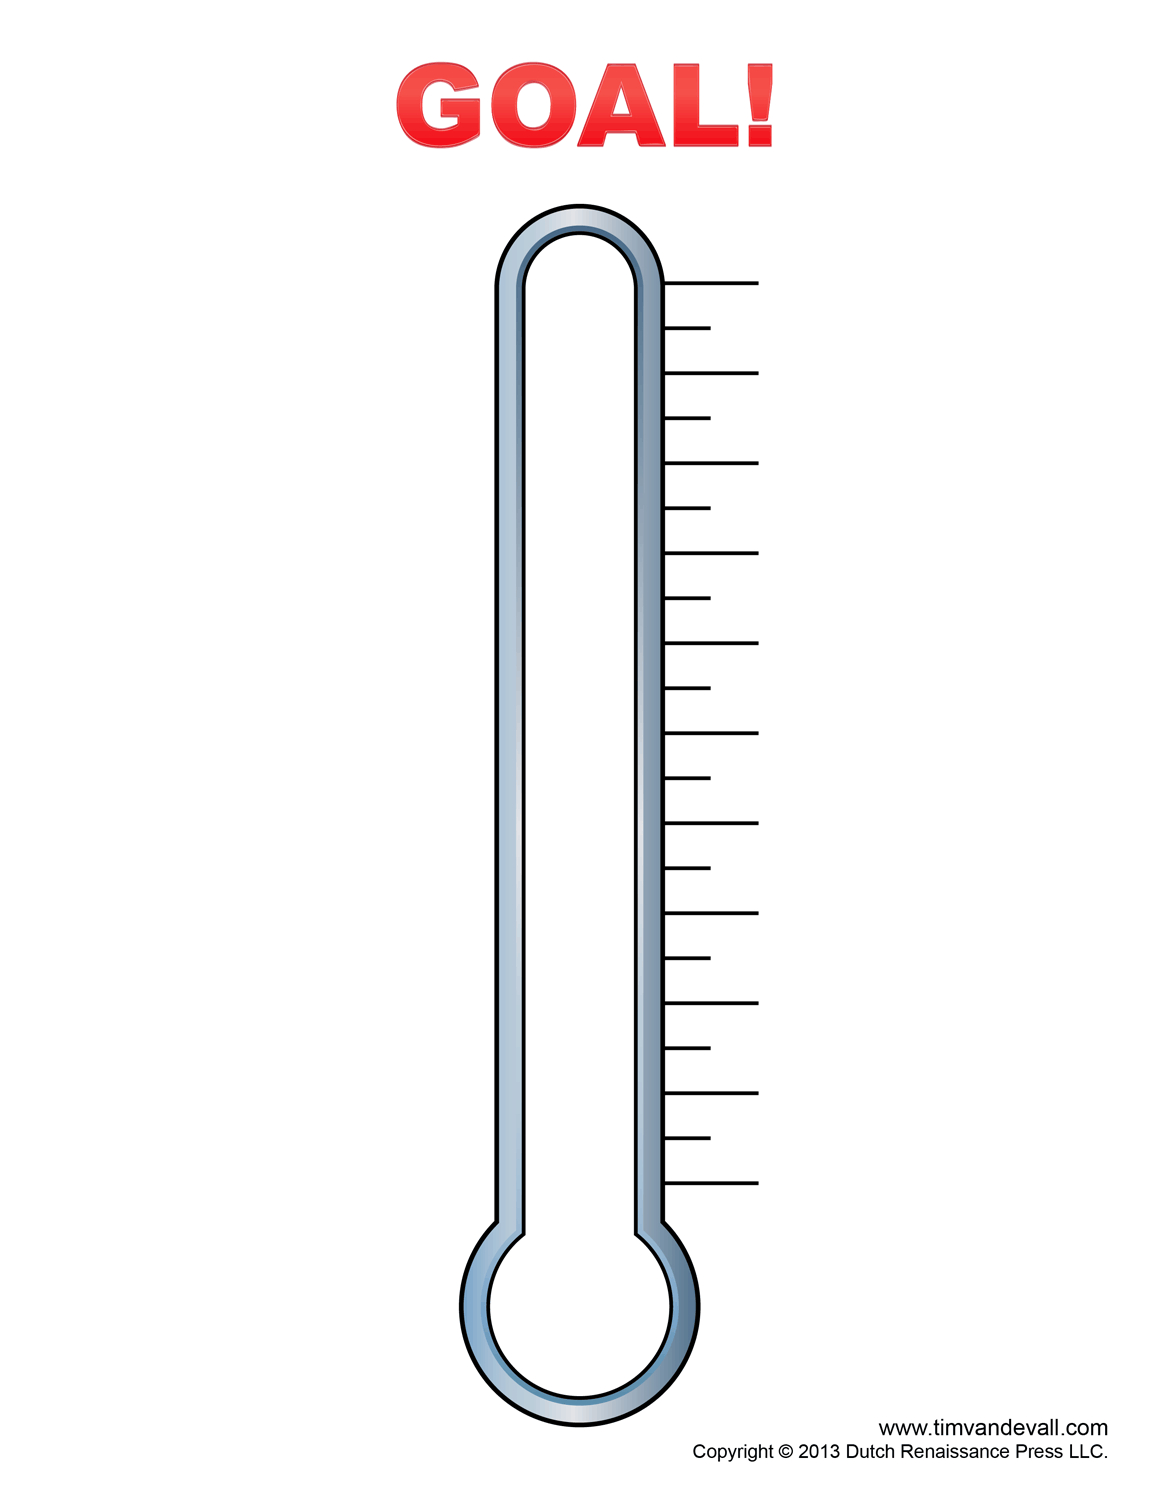 Fundraising Thermometer Template | For J | Goal Thermometer - Free Printable Goal Thermometer Template